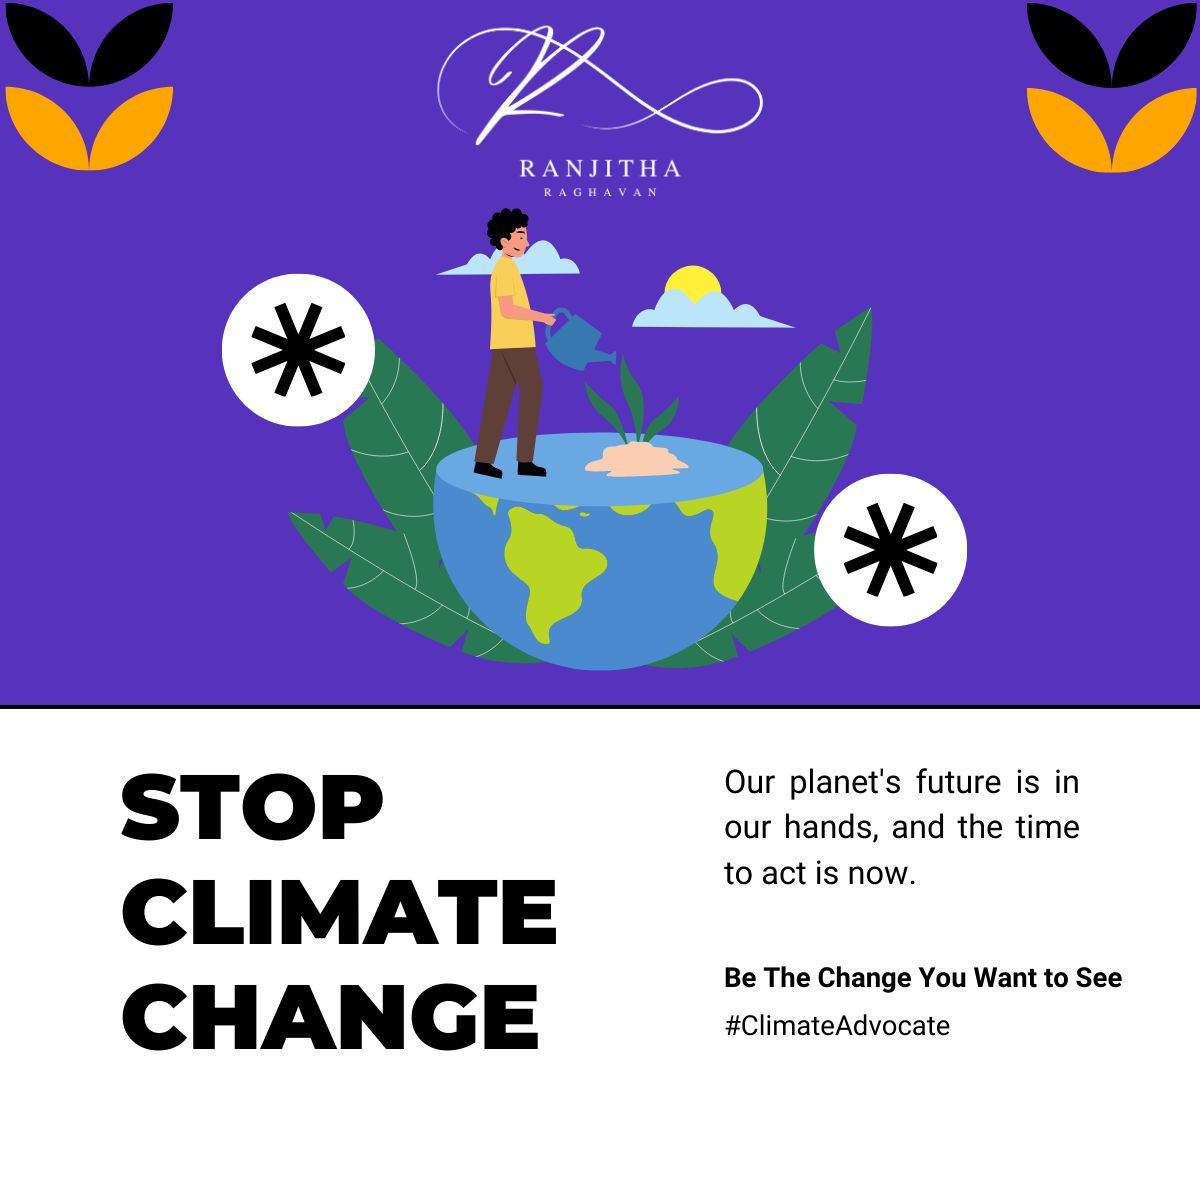 🌟 Be the Change: Every action, no matter how small, counts in the fight against climate change. Share your knowledge, take sustainable steps in your daily life, and advocate for policies that protect our planet. You become a catalyst for positive change.💪 #ClimateAdvocate